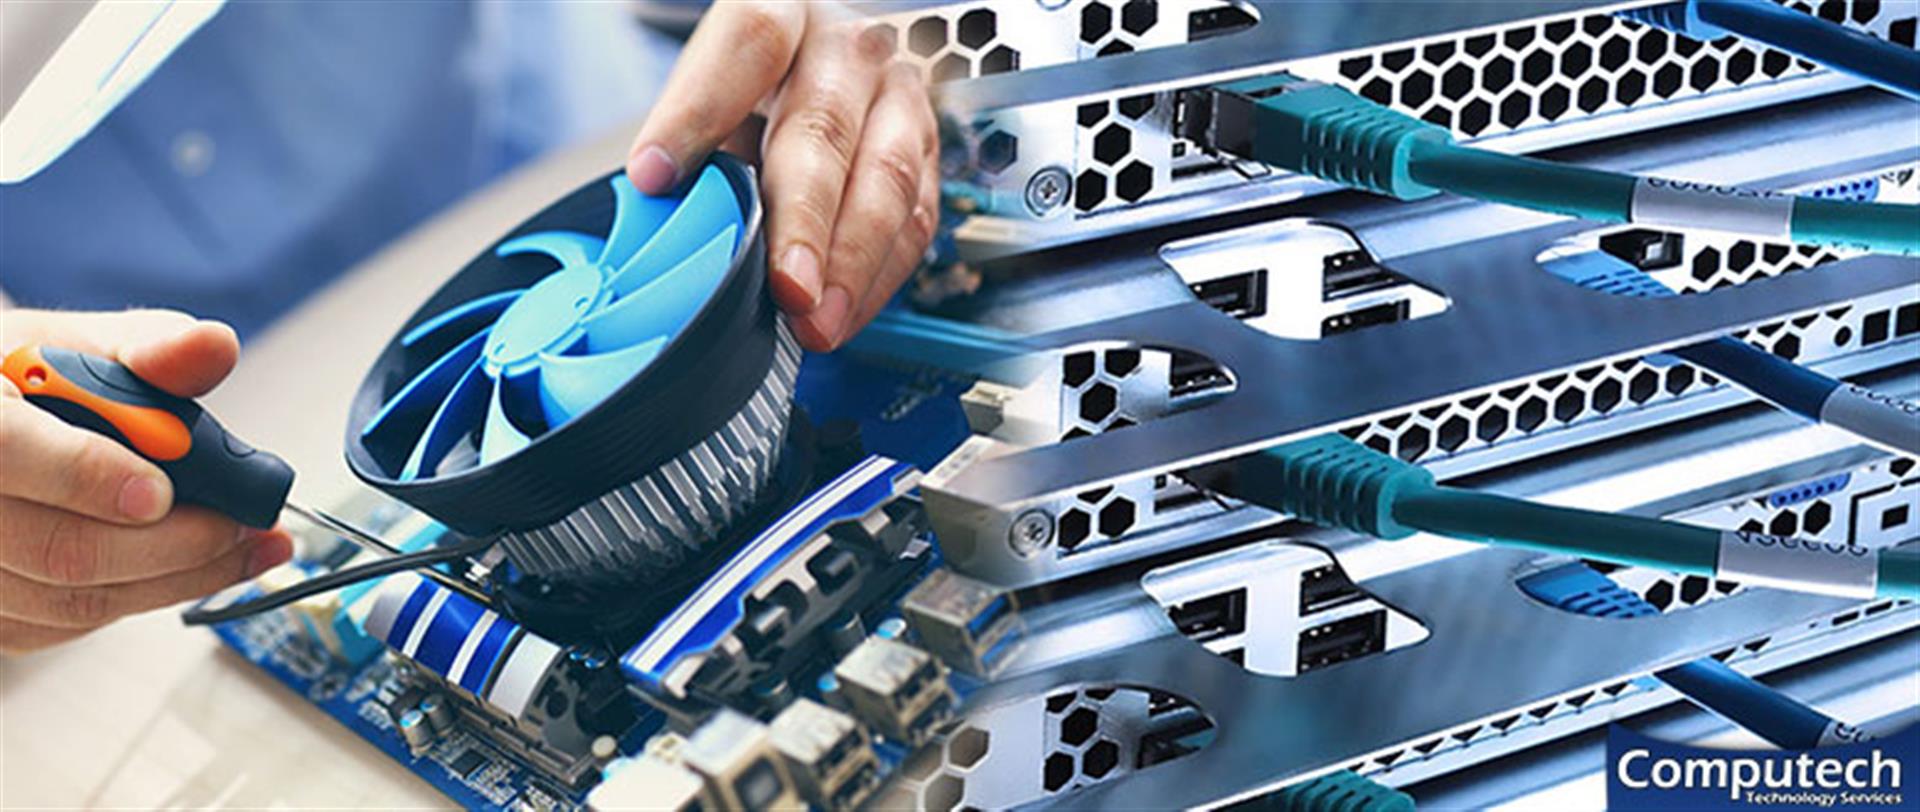 Mountain Brook Alabama Onsite PC & Printer Repairs, Networks, Telecom & Data Low Voltage Cabling Services